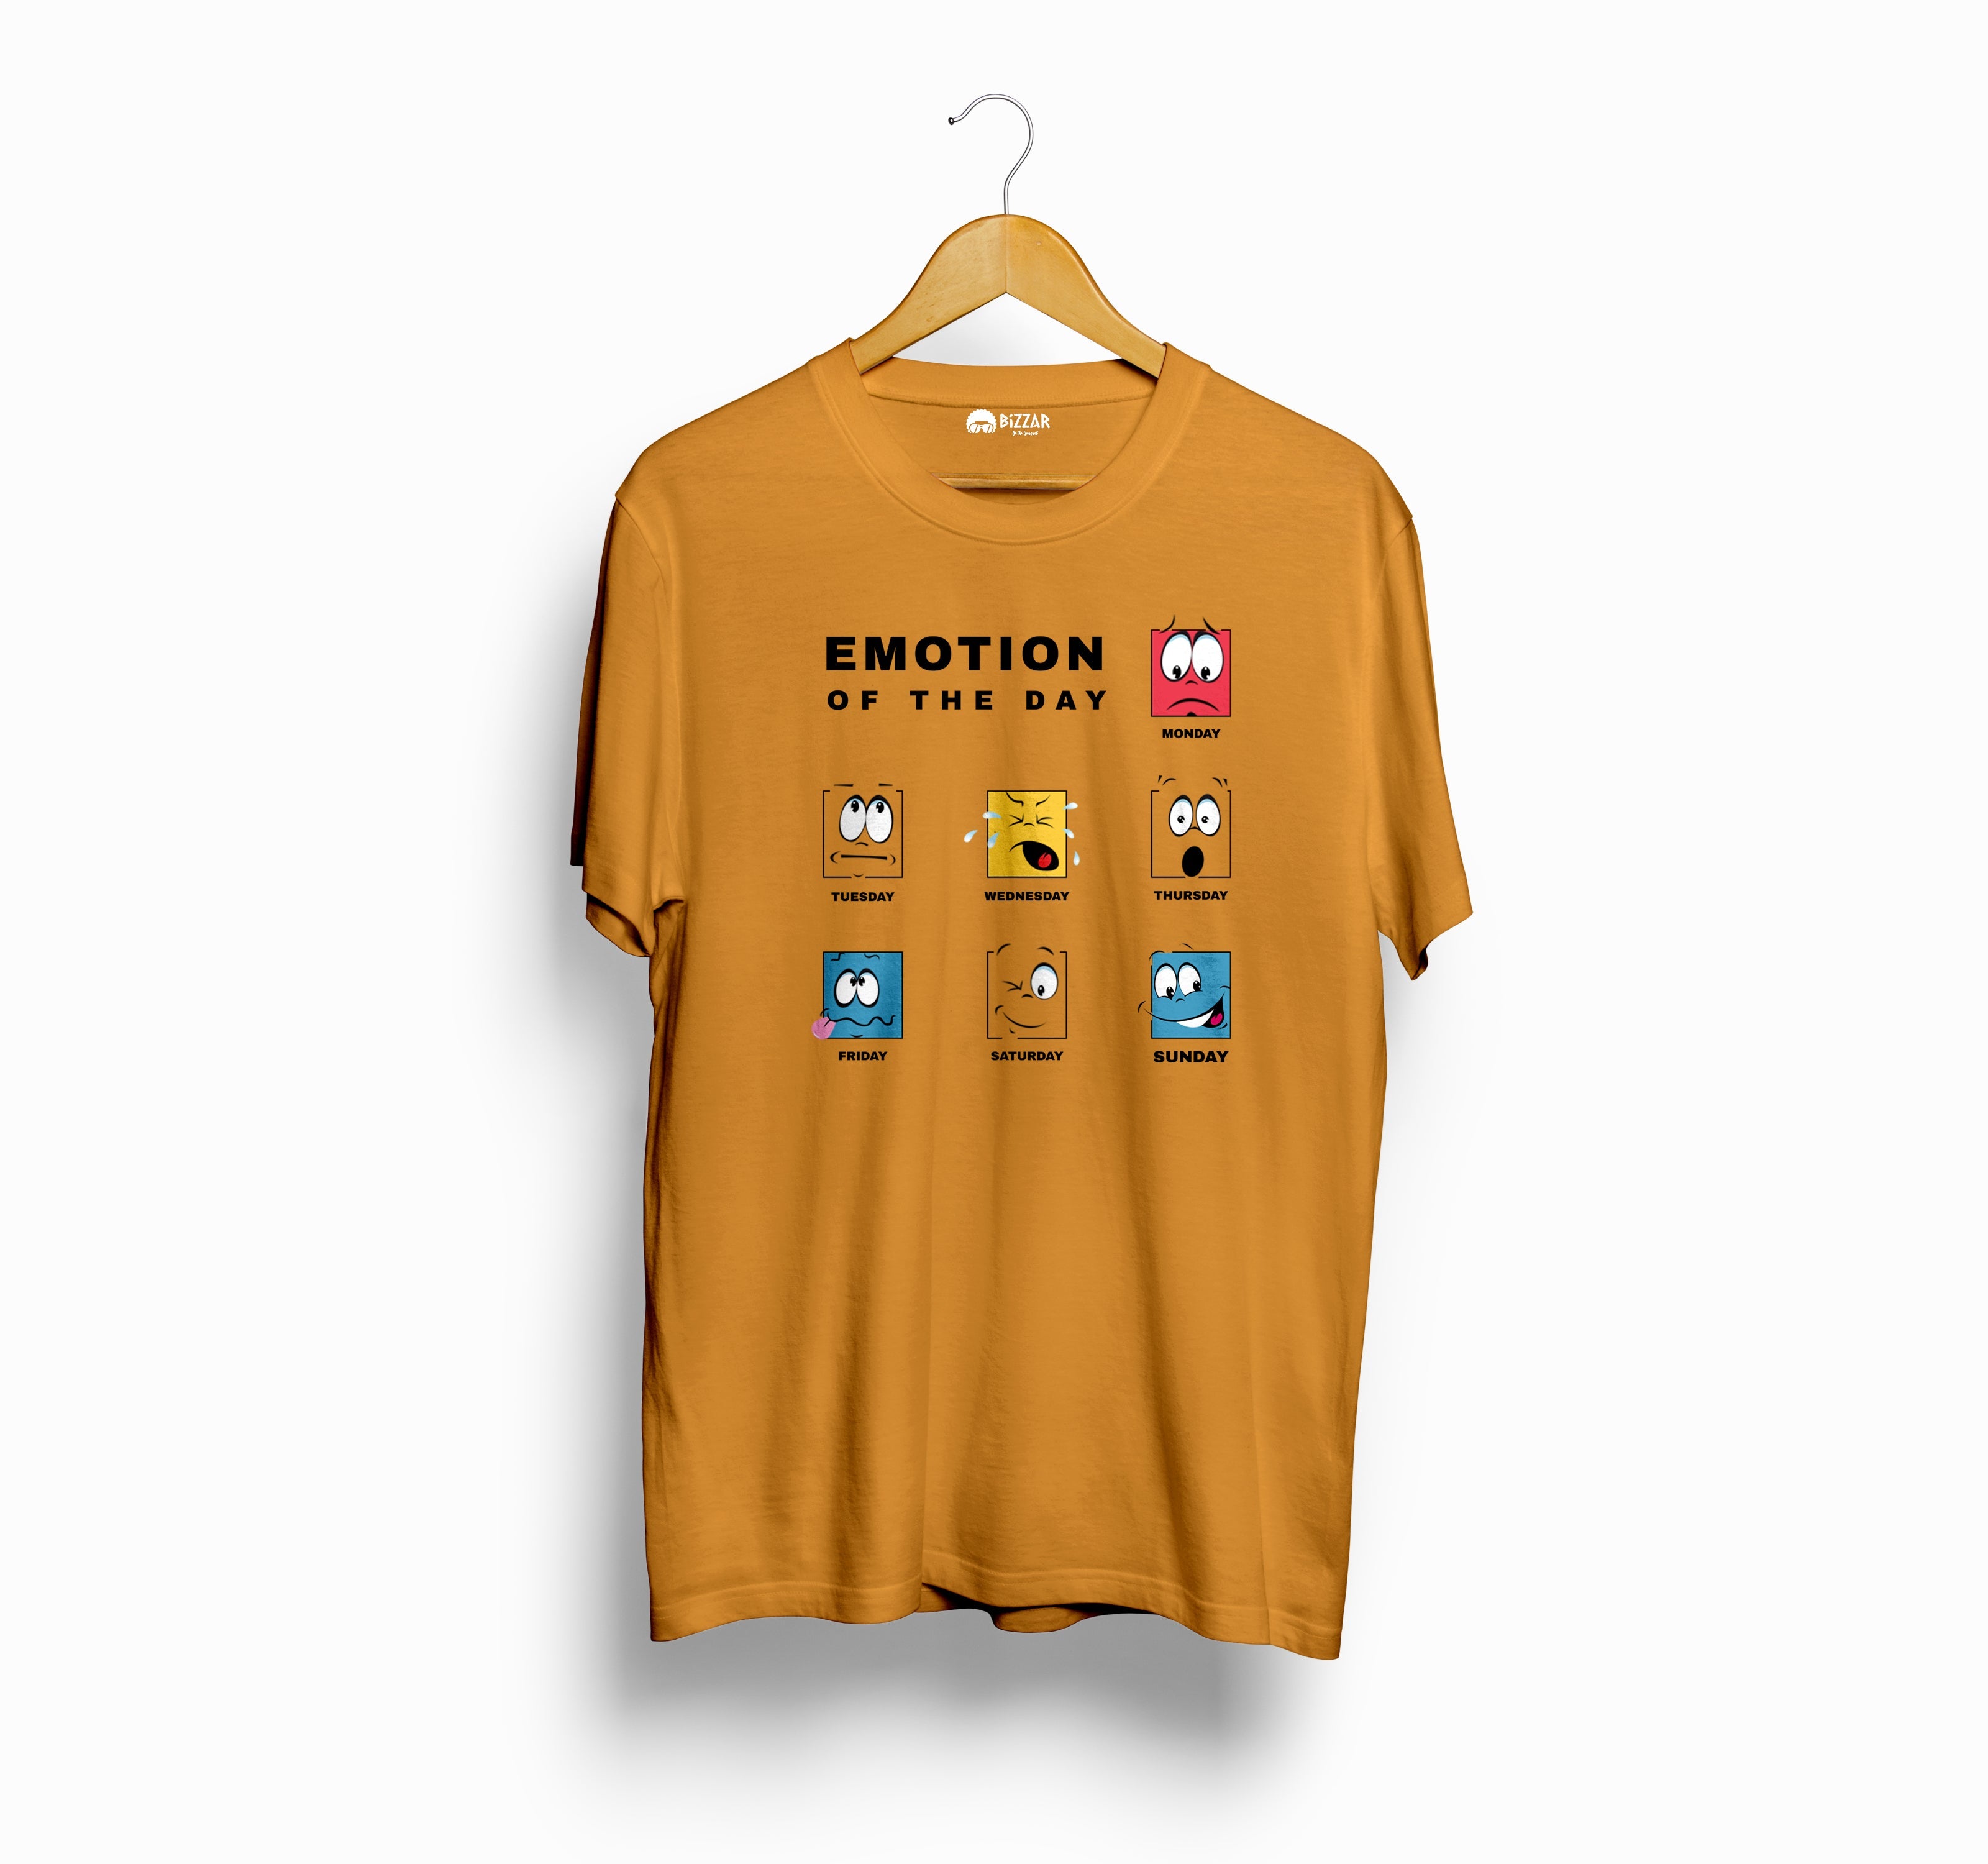 Bizzar's Emotion of the Day Golden Yellow T-Shirt